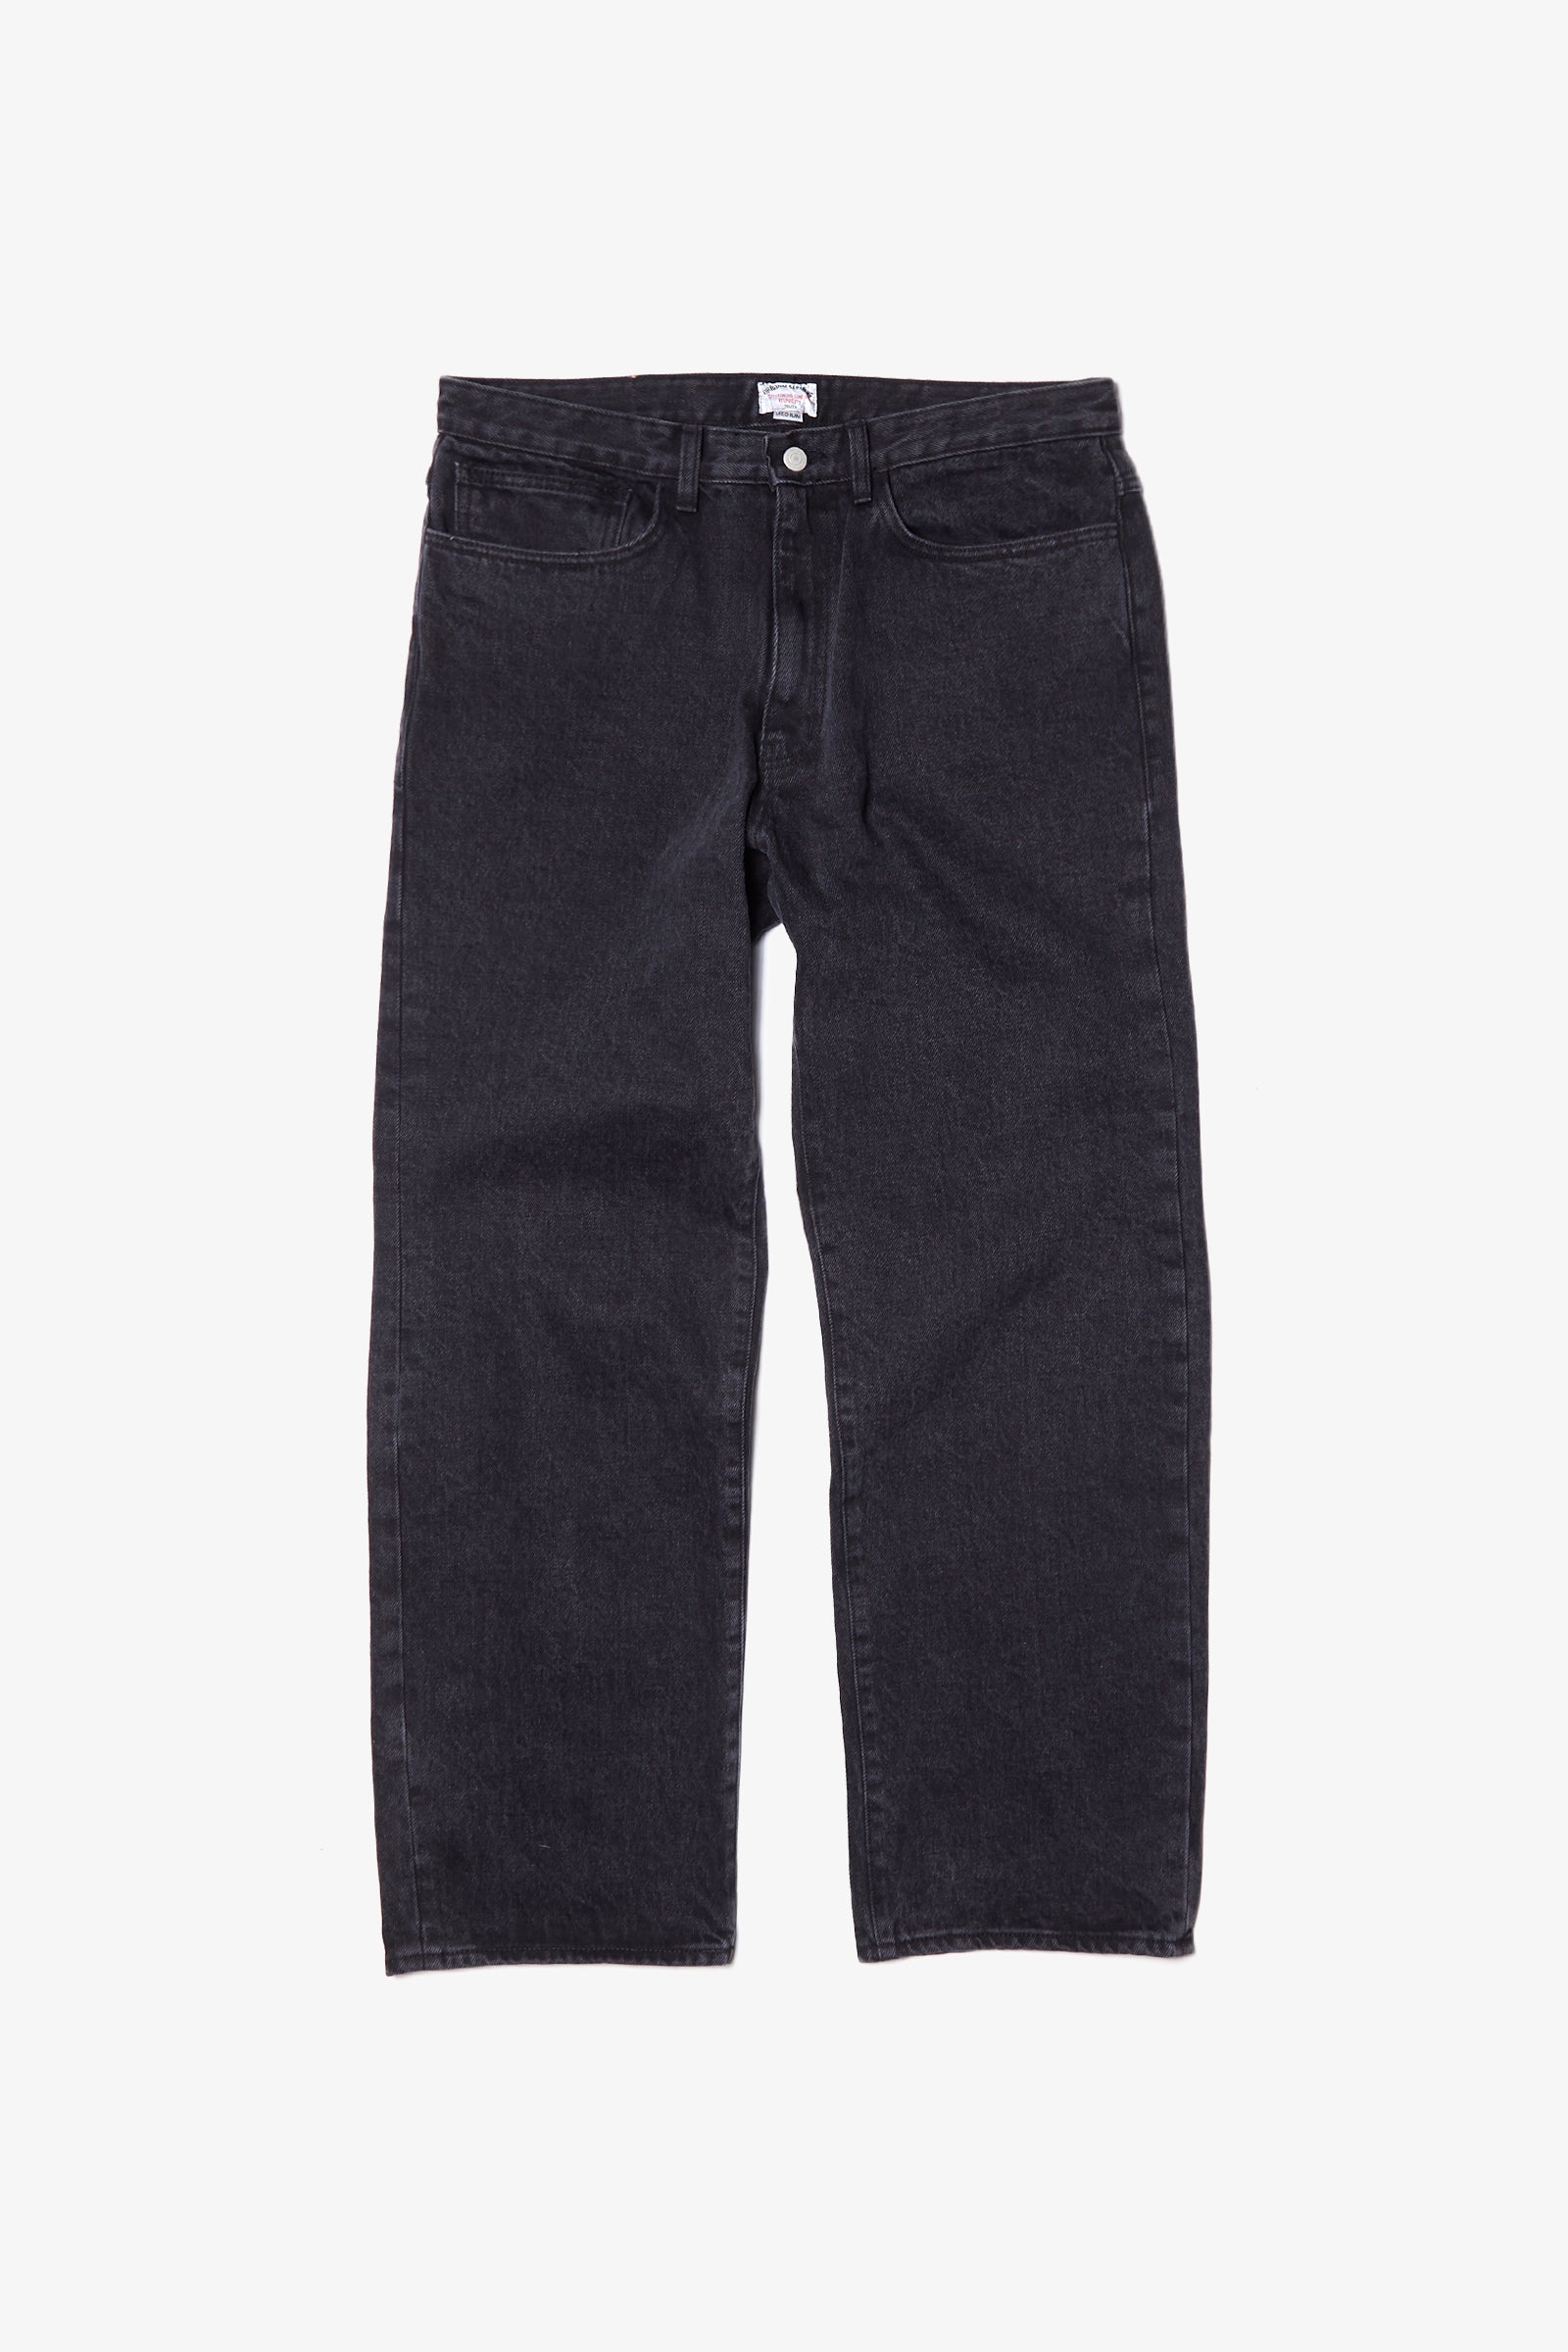 Outstanding & Co. - Wide Washed Jeans - Black